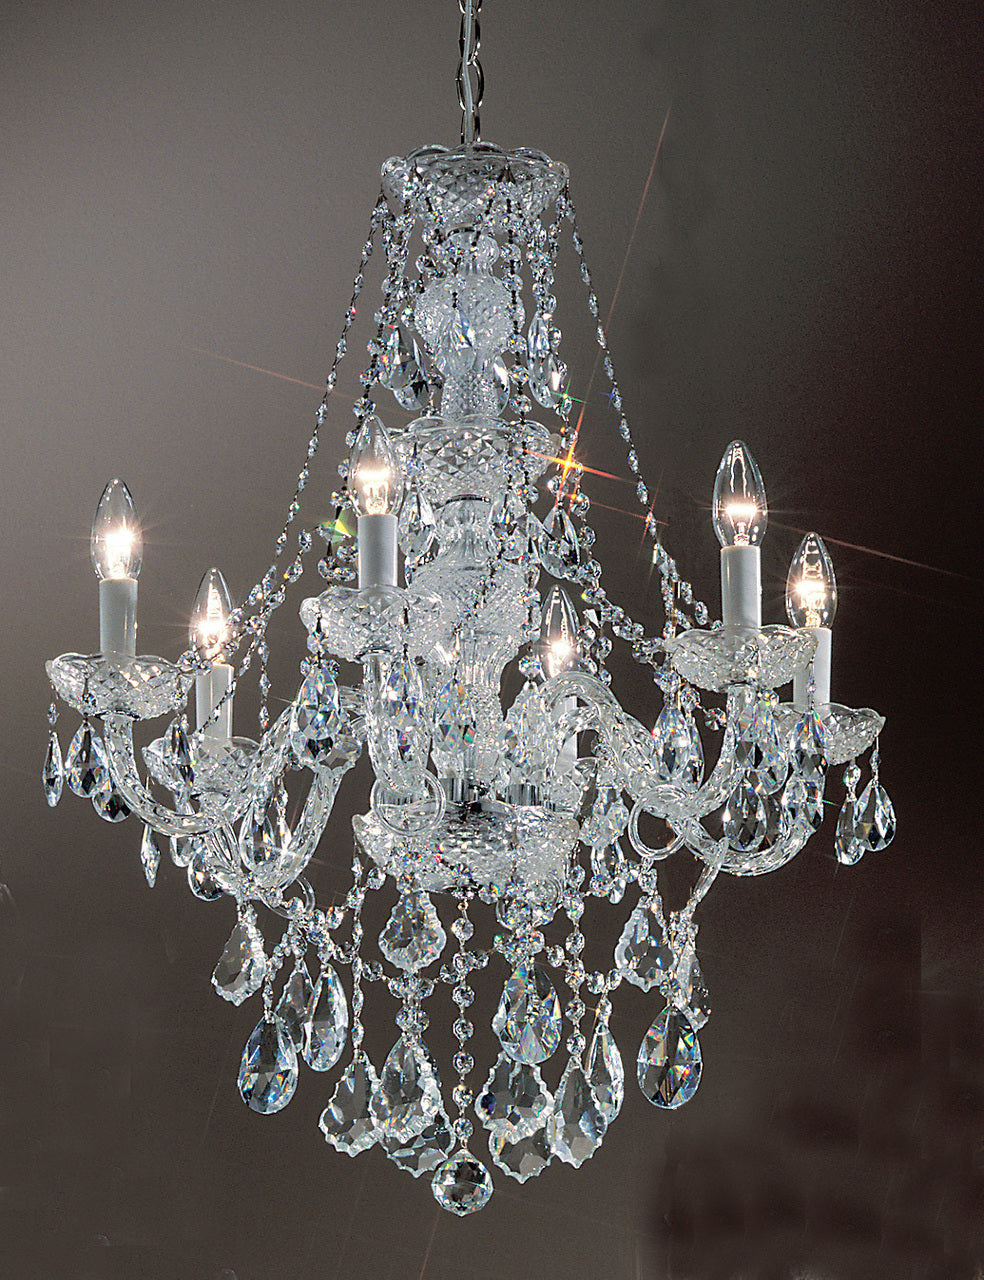 Classic Lighting 8256 CH S Monticello Crystal/Glass Chandelier in Chrome